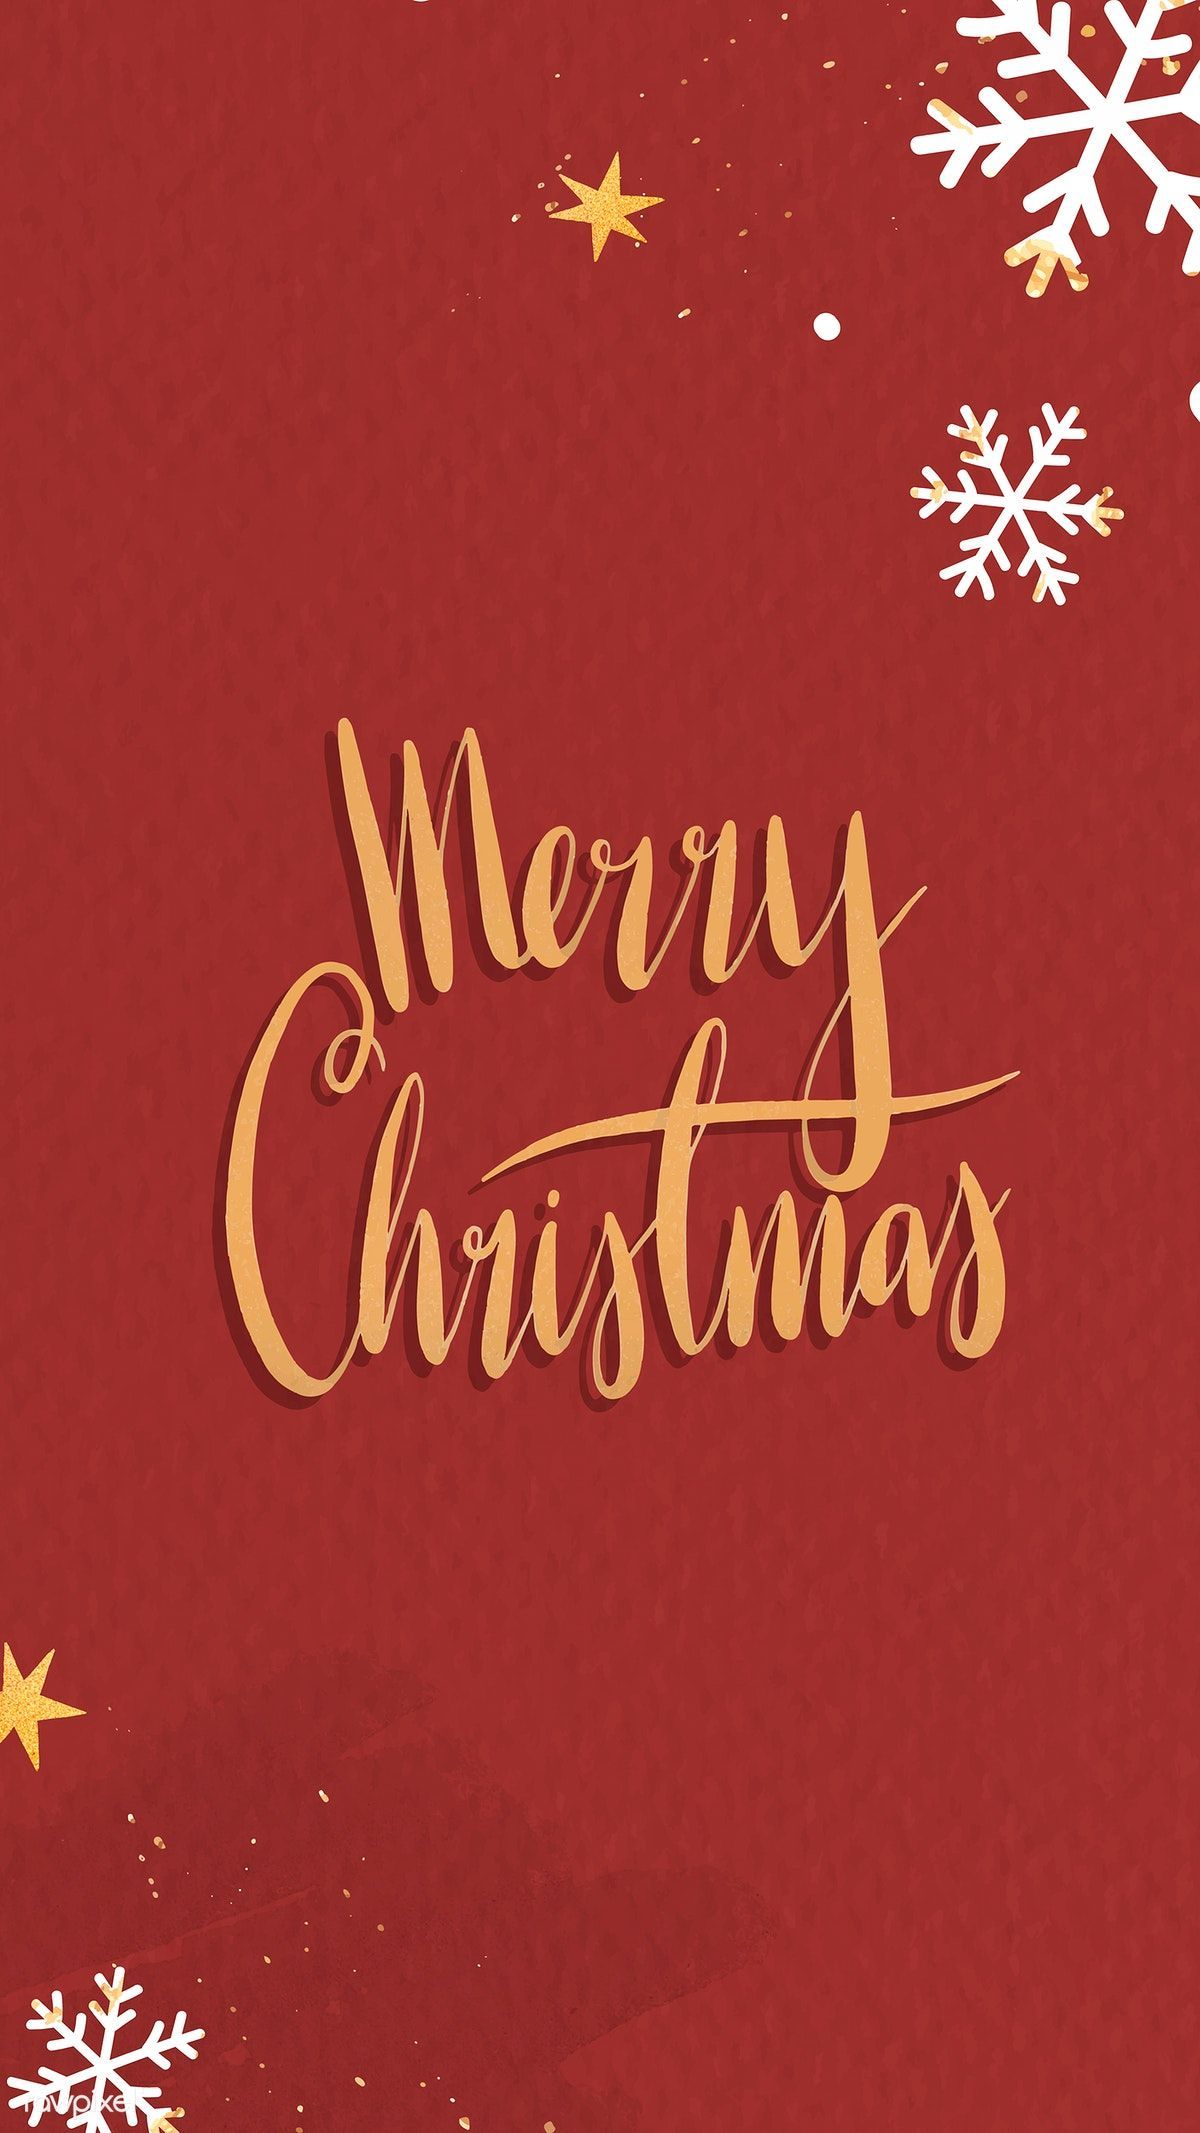 Download premium vector of Gold Merry Christmas on red mobile phone. Merry christmas wallpaper, Christmas phone wallpaper, Merry christmas background